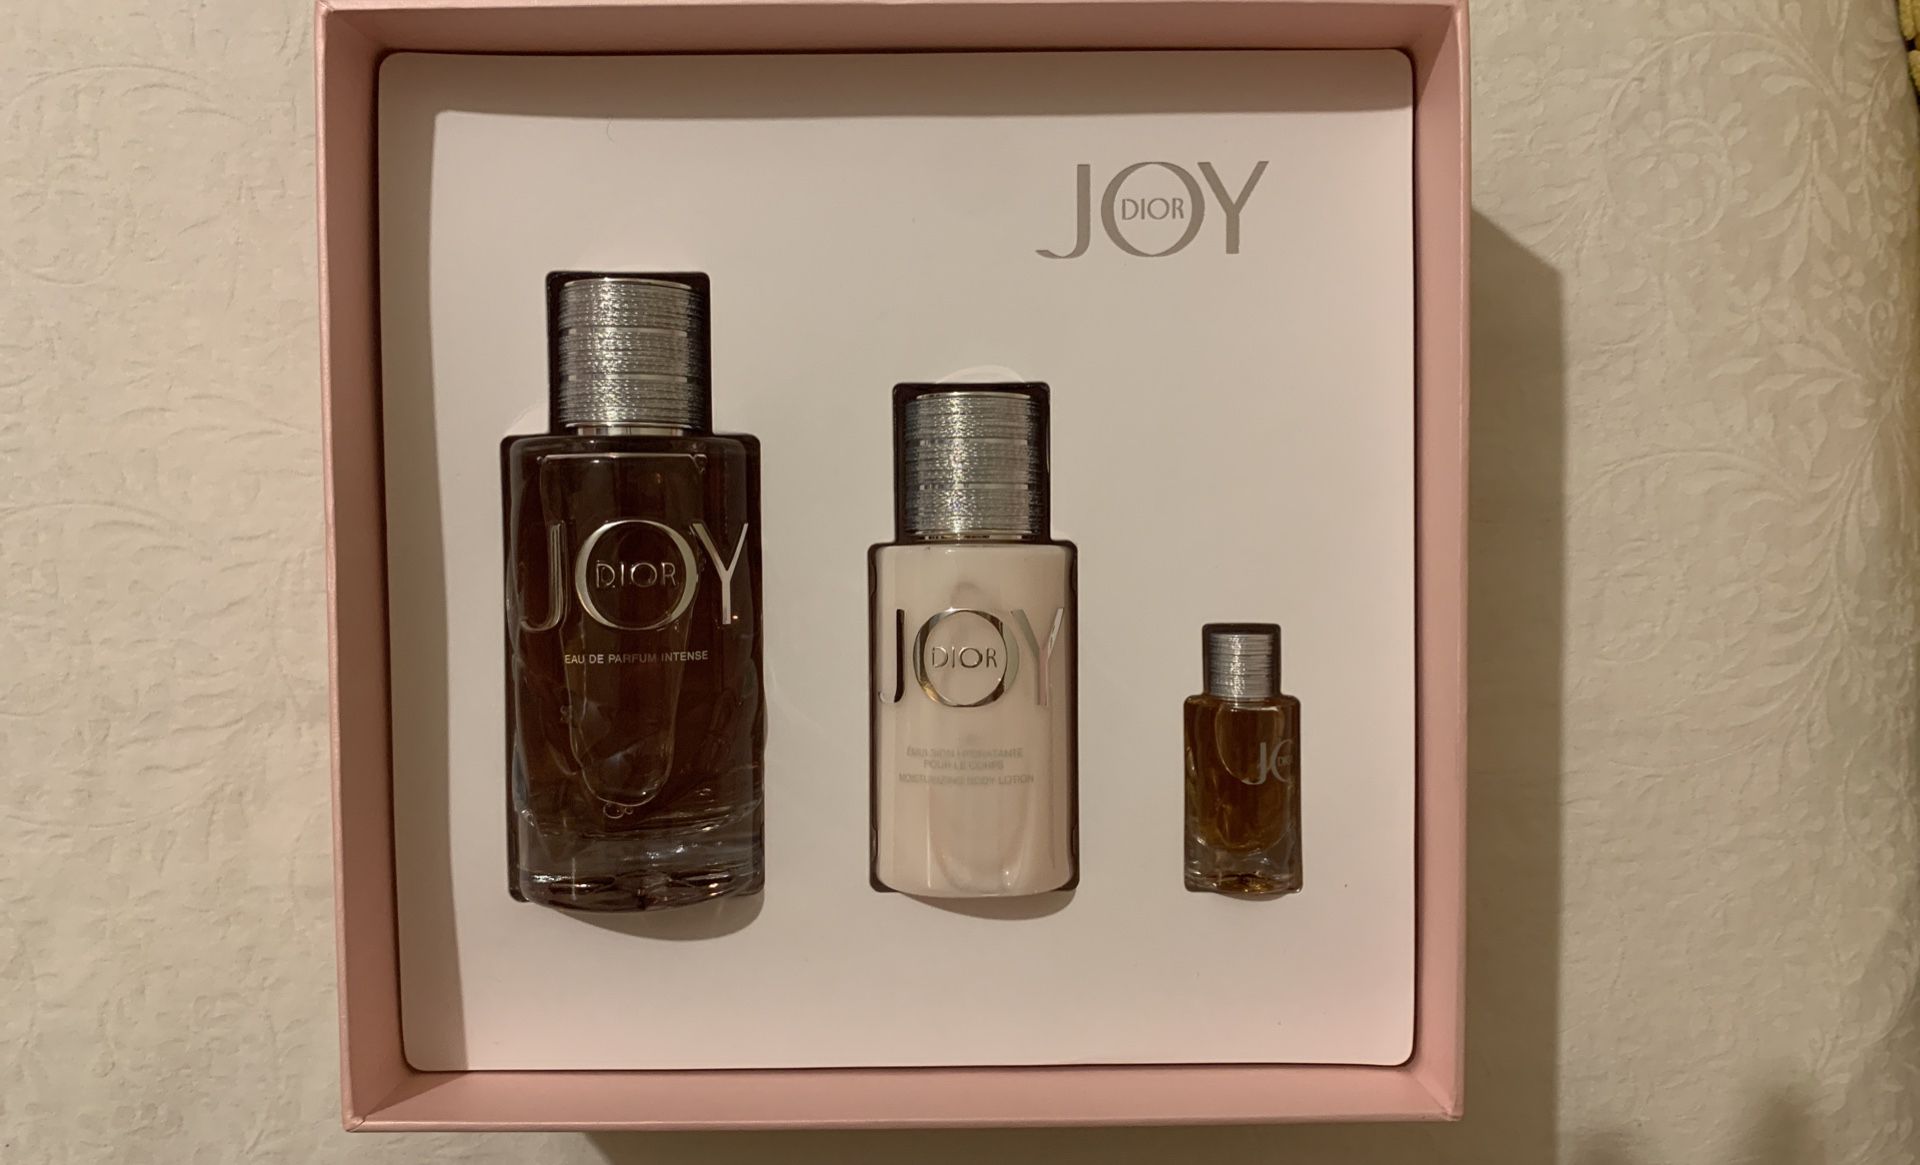 JOY BY DIOR Eau de Parfum Intense Gift Set for Sale in New York, NY -  OfferUp